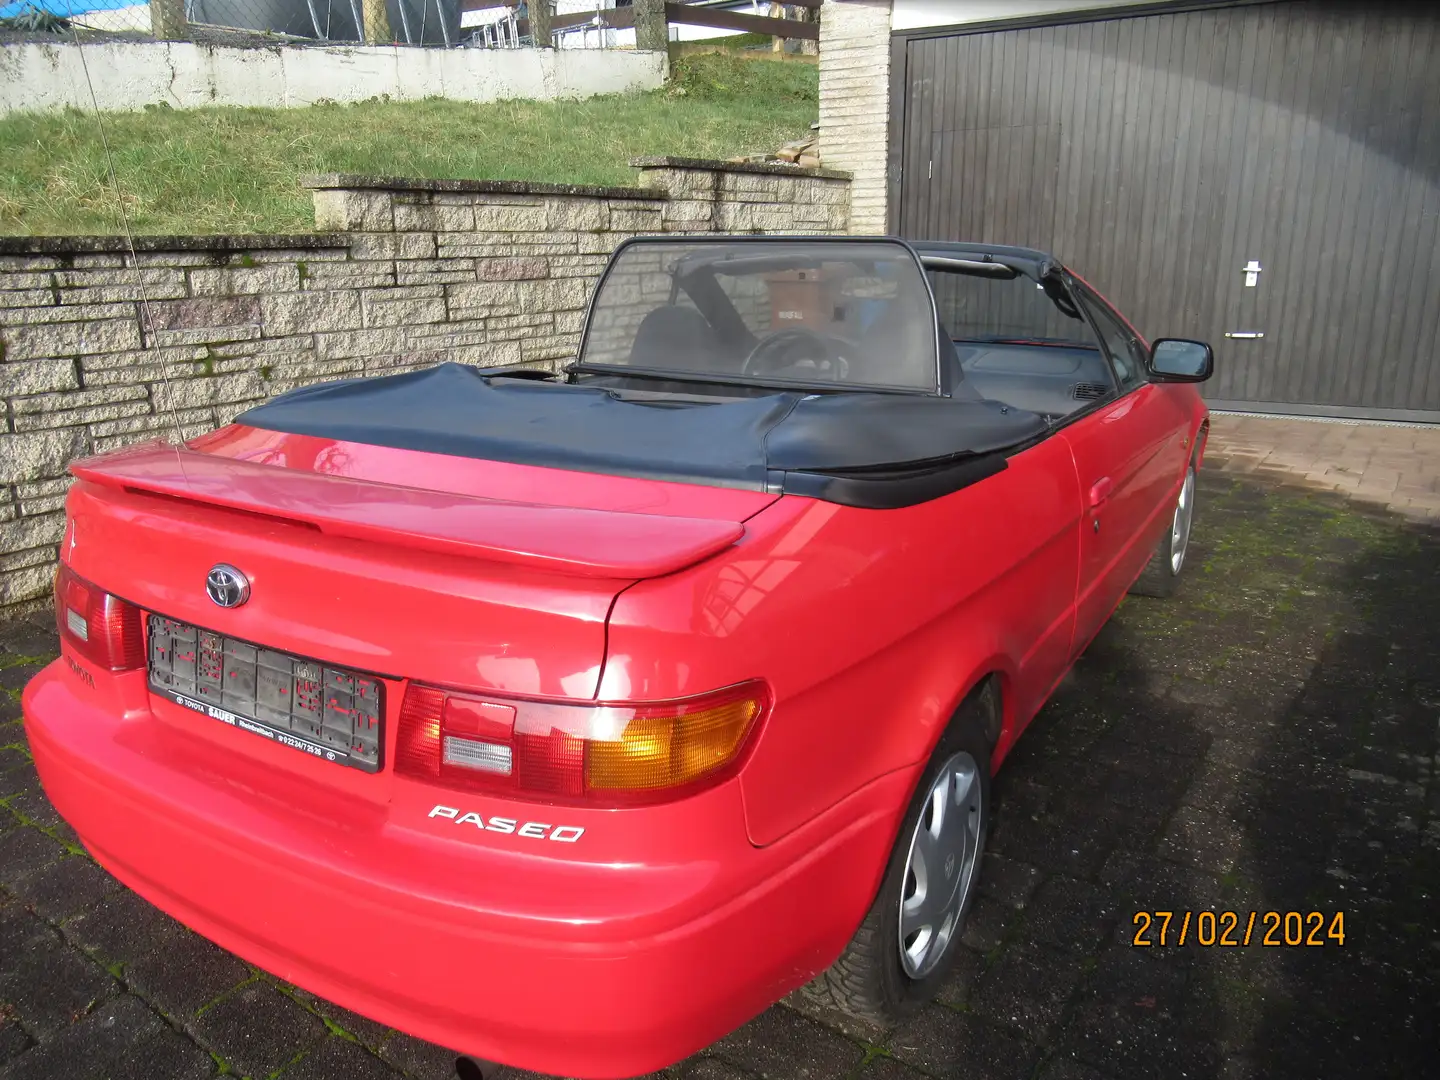 Toyota Paseo Paseo Cabriolet 1.5 Rot - 2